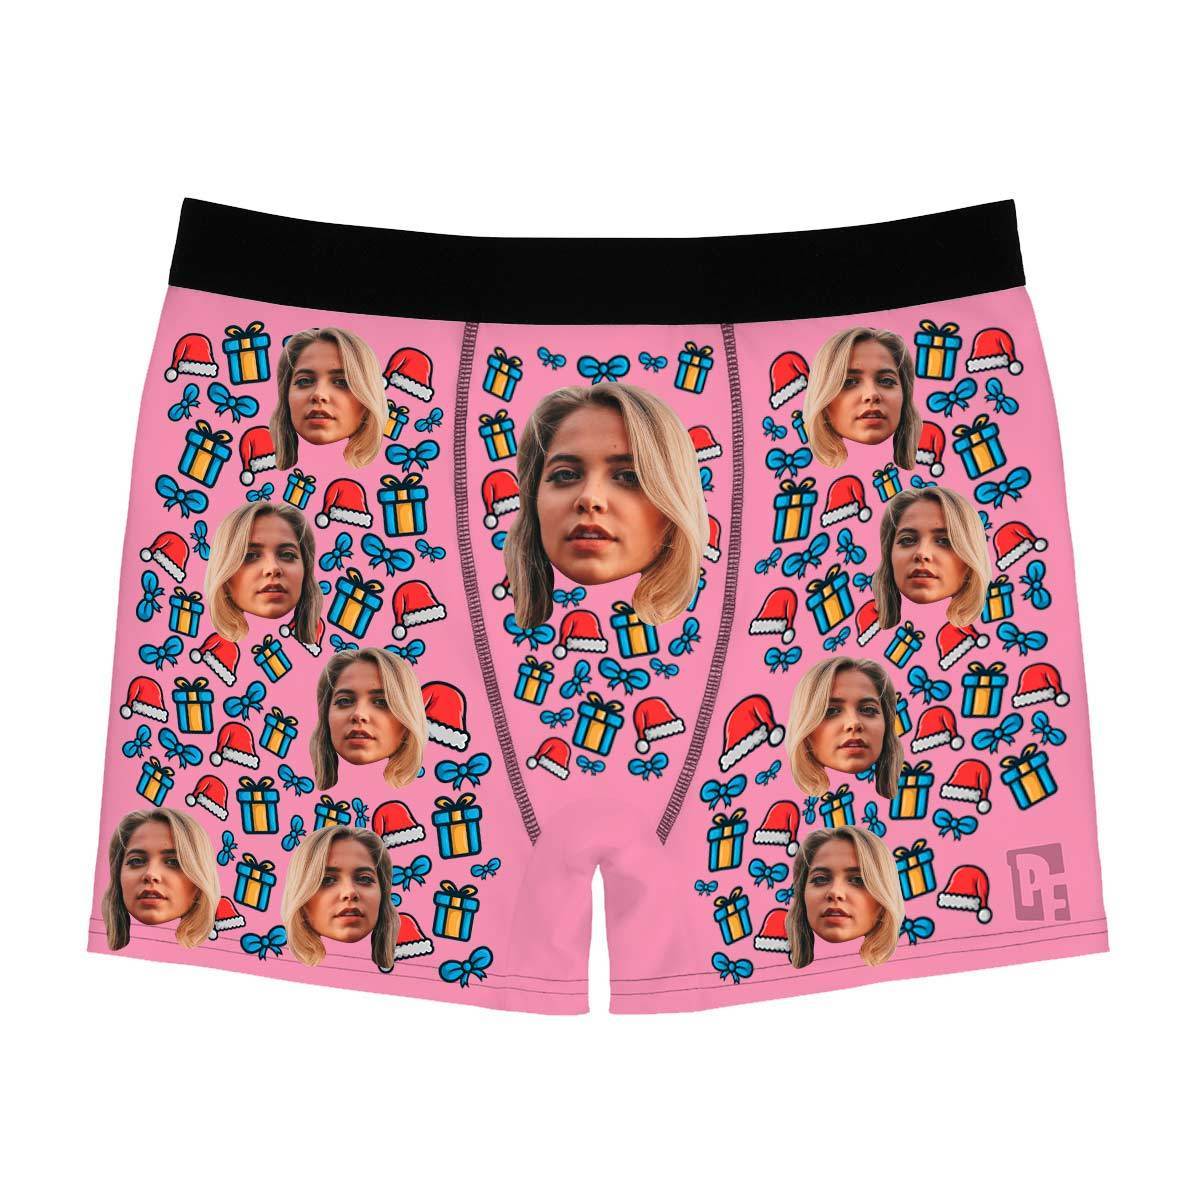 Pink Christmas Hat men's boxer briefs personalized with photo printed on them